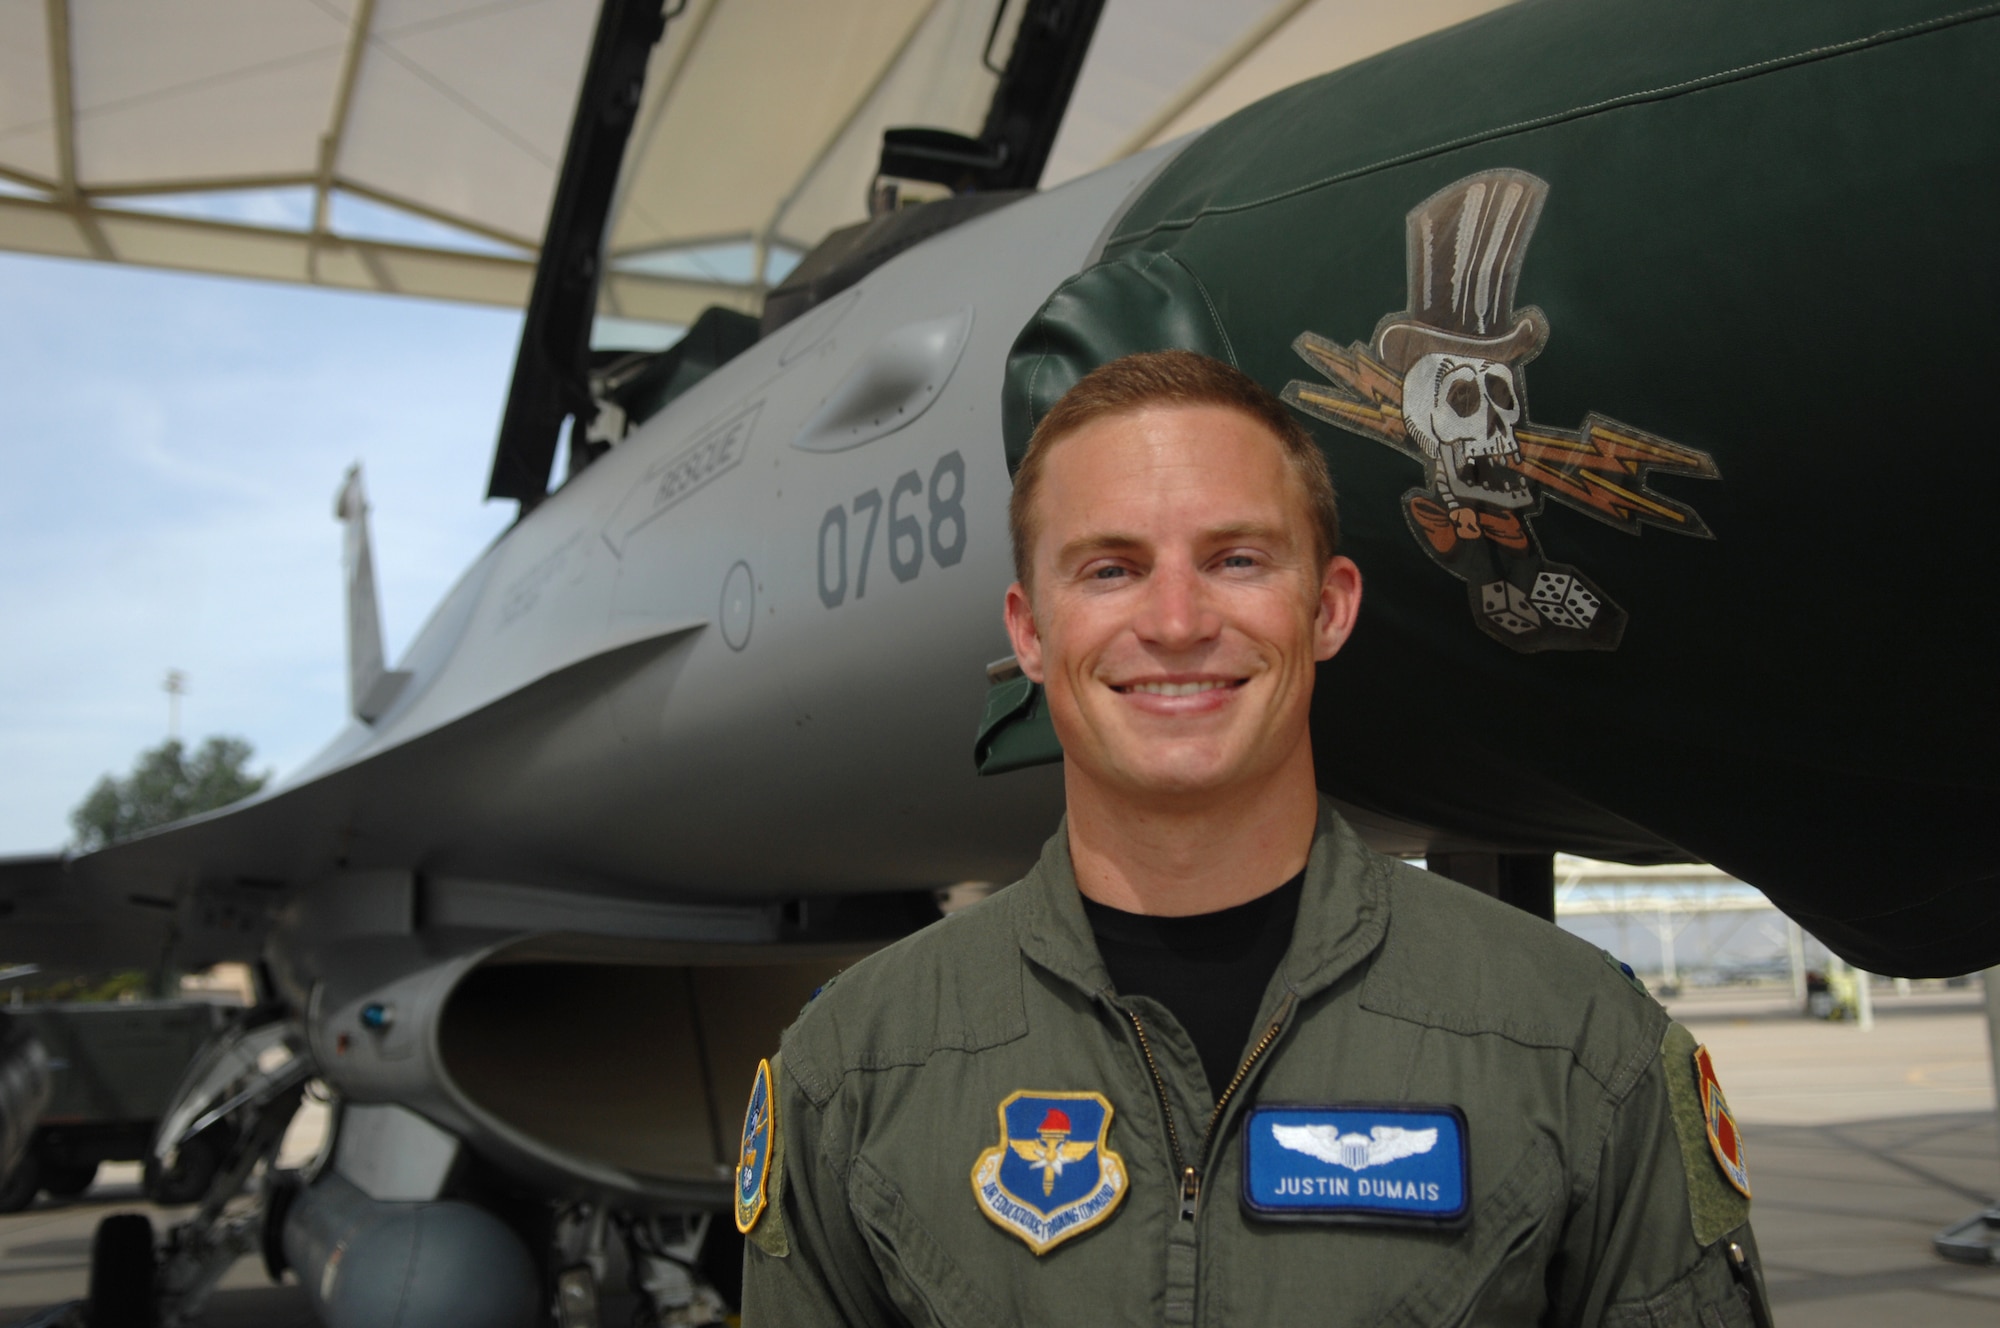 1st Lt. Justin Dumais, 310th FS student F-16 pilot, stands in front of an F-16 at Luke AFB. Lt. Dumais competed in the 2004 Olympics as a syncronized diver with his brother Troy in Athens, Greece. Lt. Dumais now serves in the U.S. Air Force while his brother Troy continued diving and competed in the 2008 Olympics in Beijing. (U.S. Air Force photo by TSgt. Jeffrey Wolfe) 